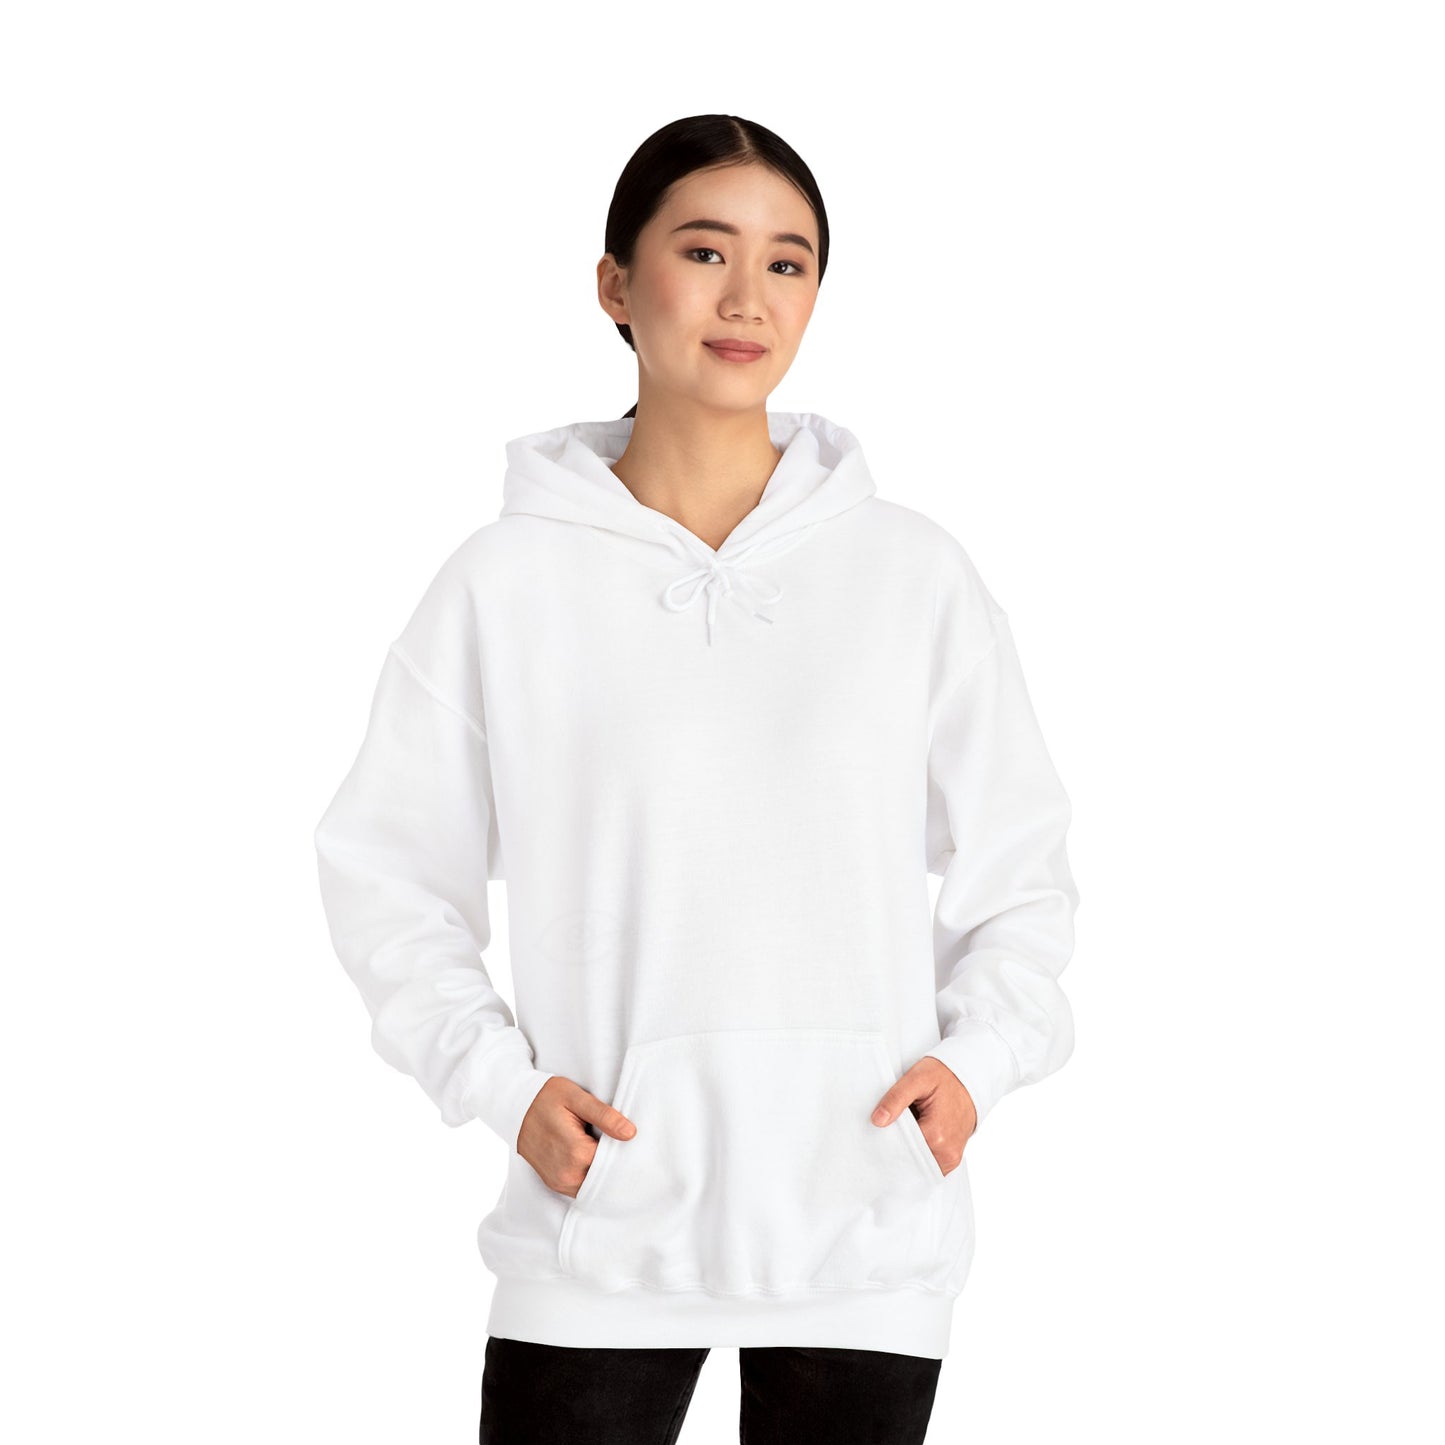 Mother's Day Mother's Vs Everybody Hoodie